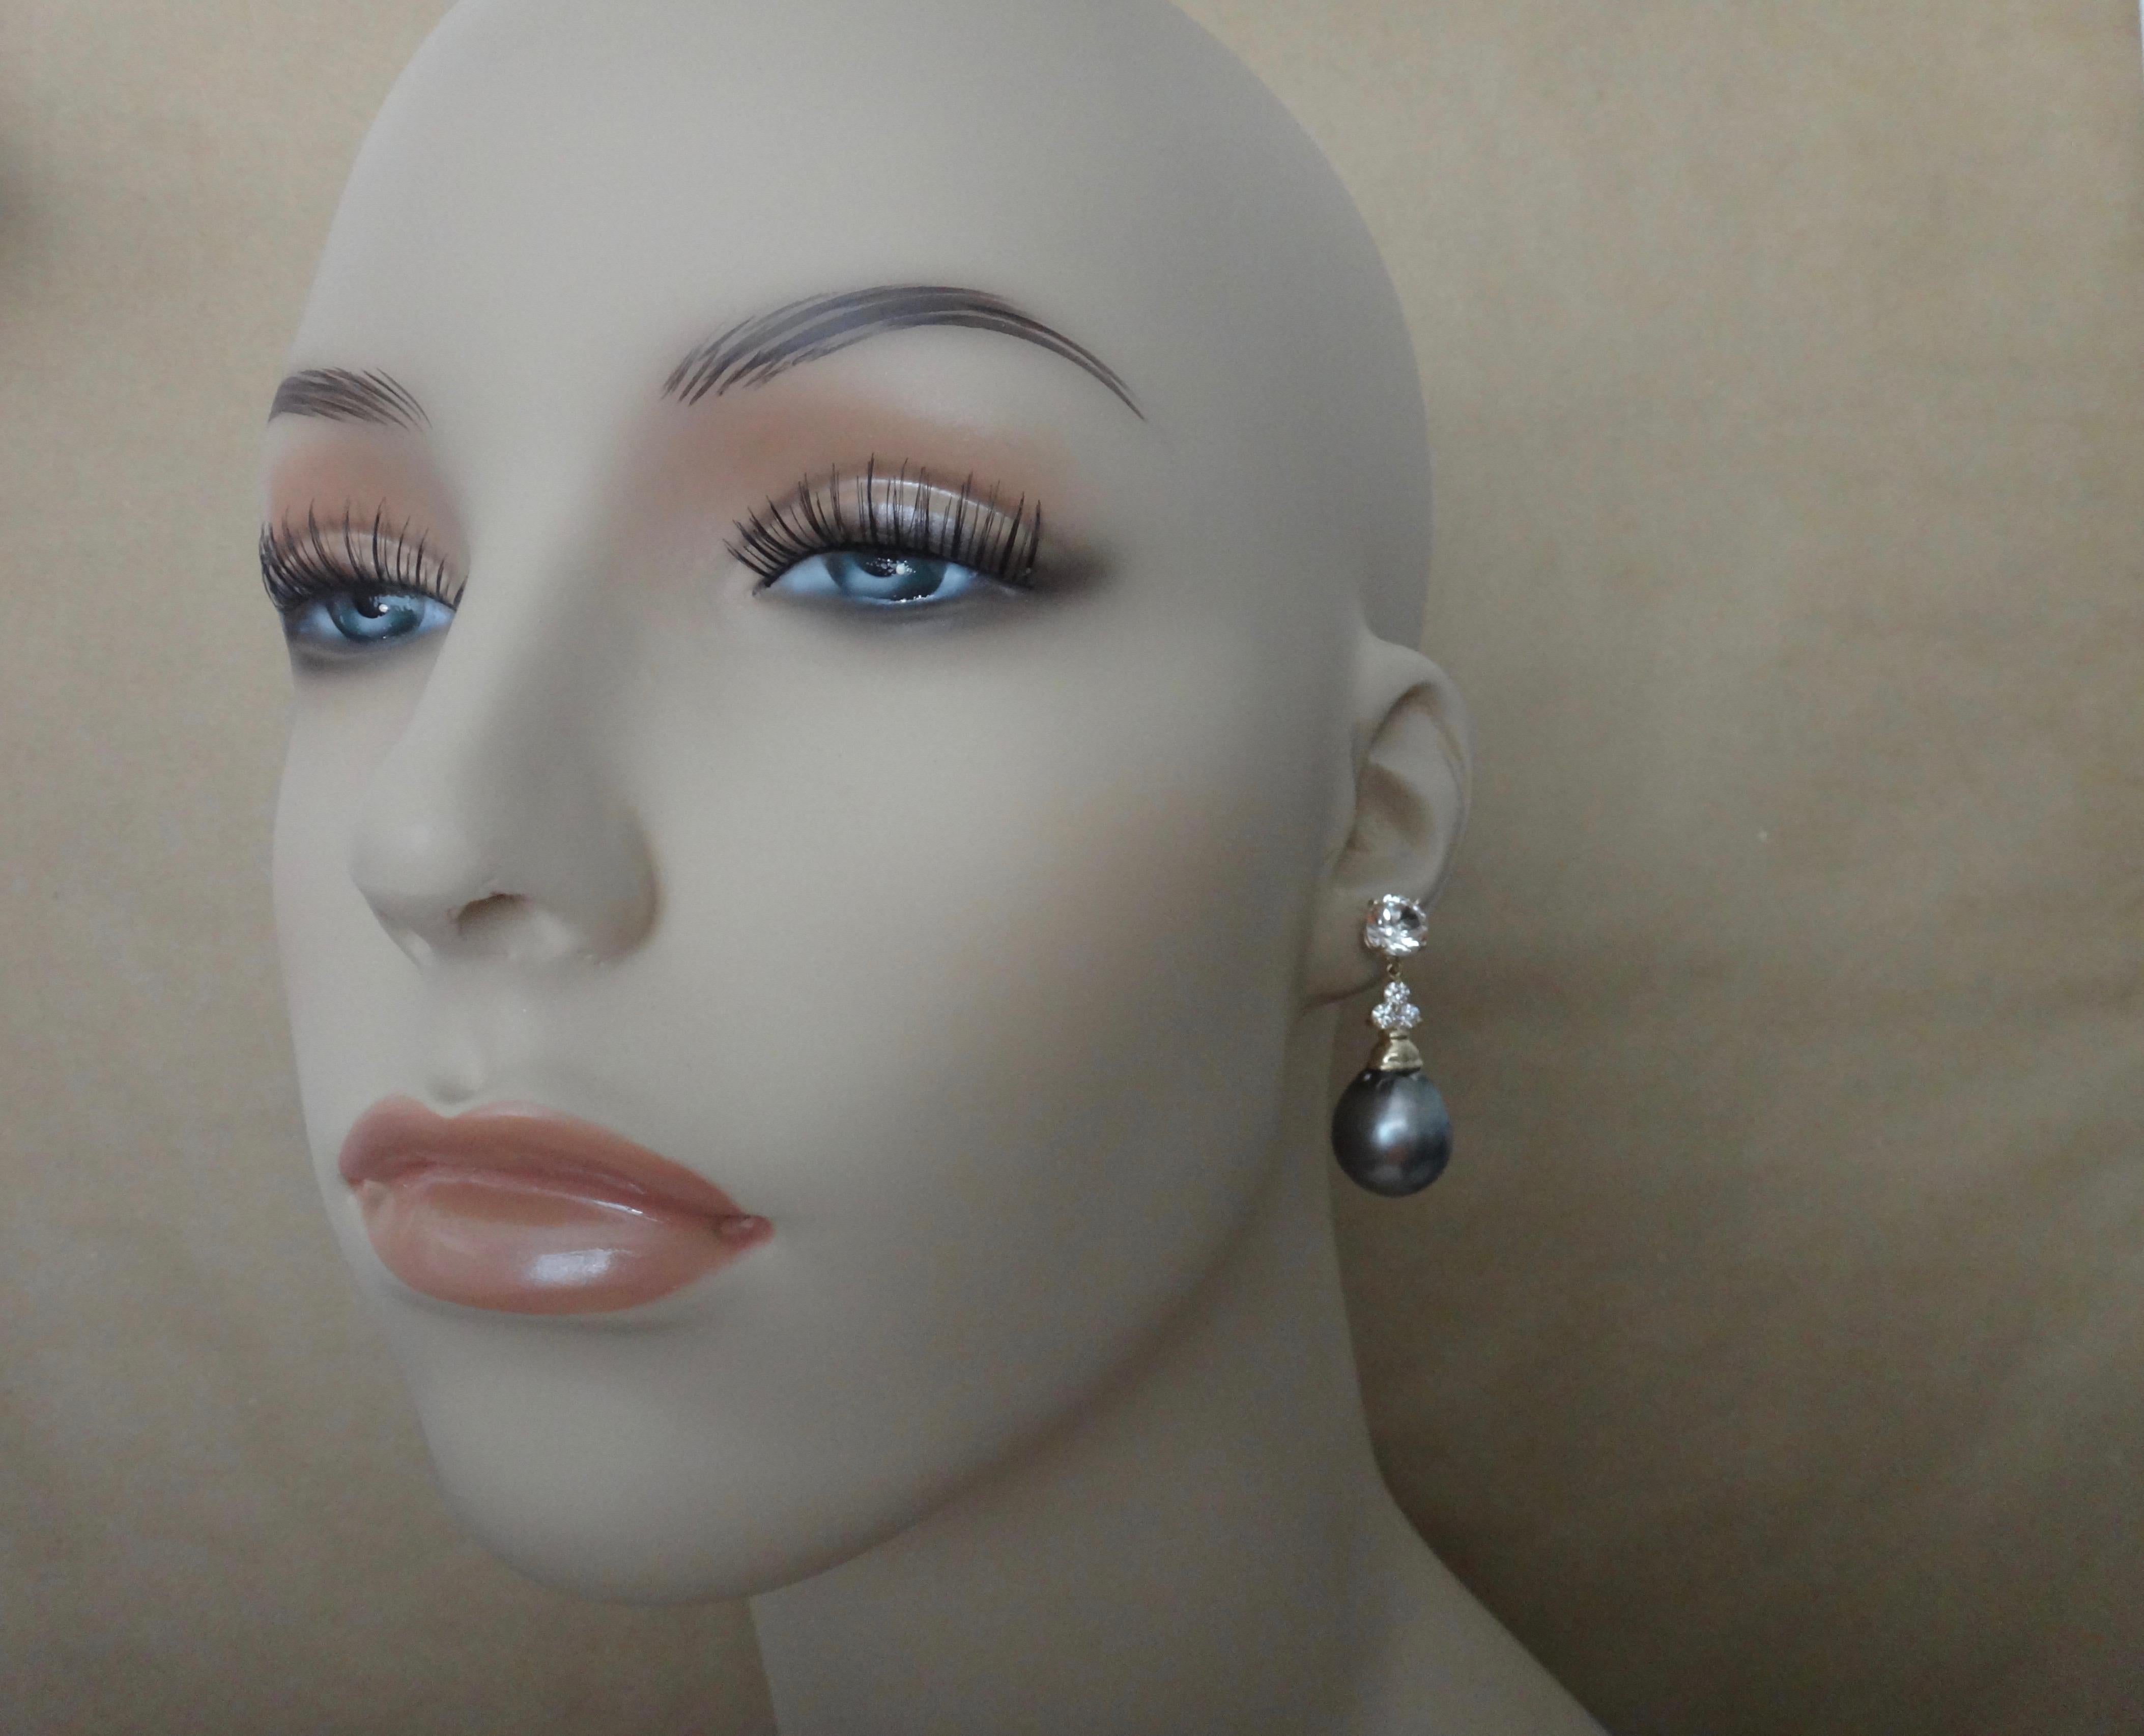 Tahitian pearls along with brilliant cut silver sapphires and white diamonds combine to form these archetypal dangle earrings.  The pear shaped baroque pearls measure a whooping 16mm, are medium gray in color and possess wonderful luster.  The